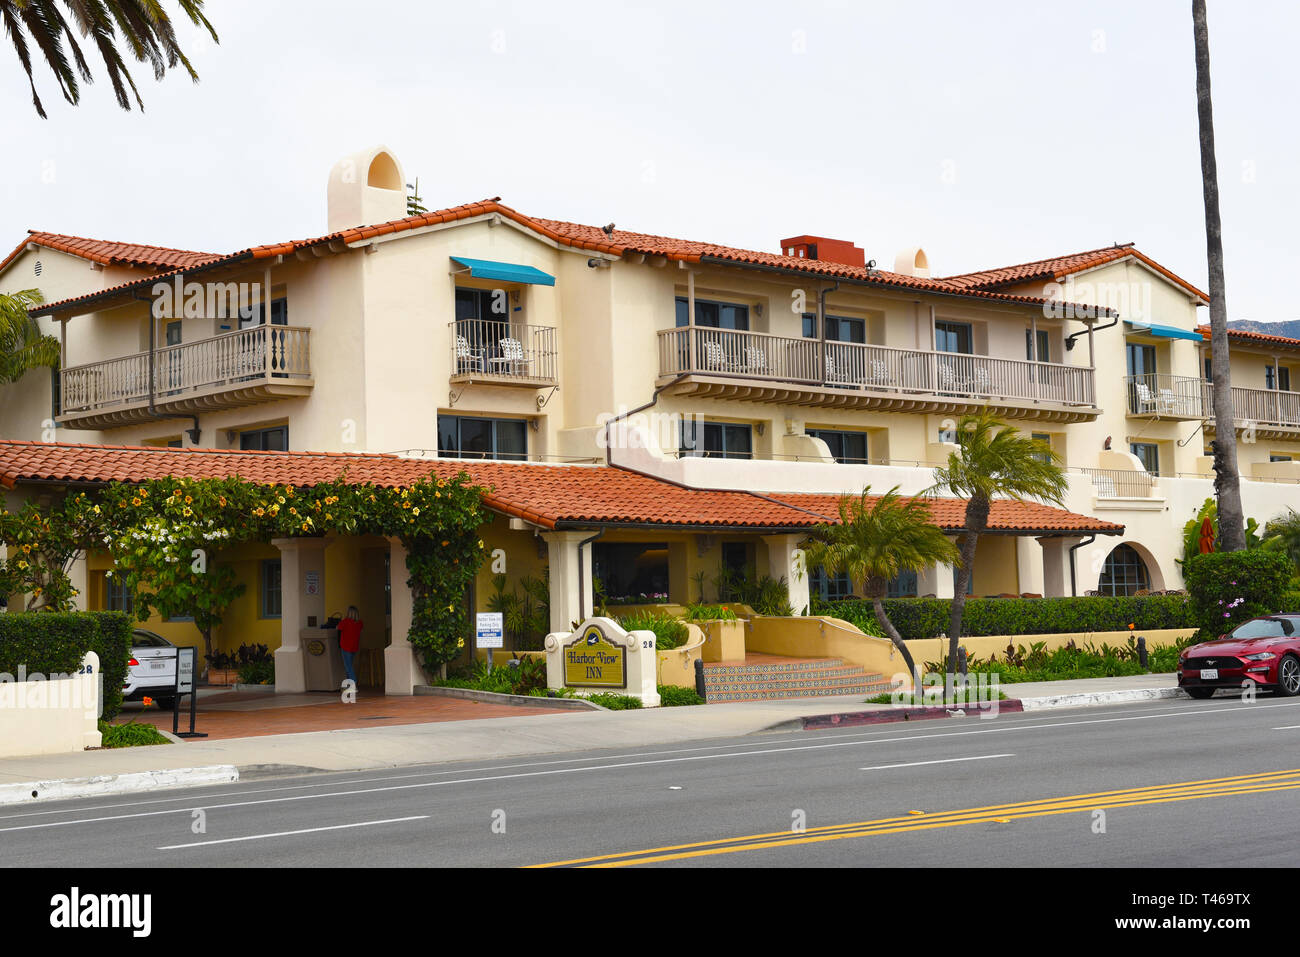 SANTA BARBARA, CALIFORNIA - APRIL 11, 2019: The Harbor View Inn, a family friendly resort style hotel across from West Beach and historic Stearns Whar Stock Photo